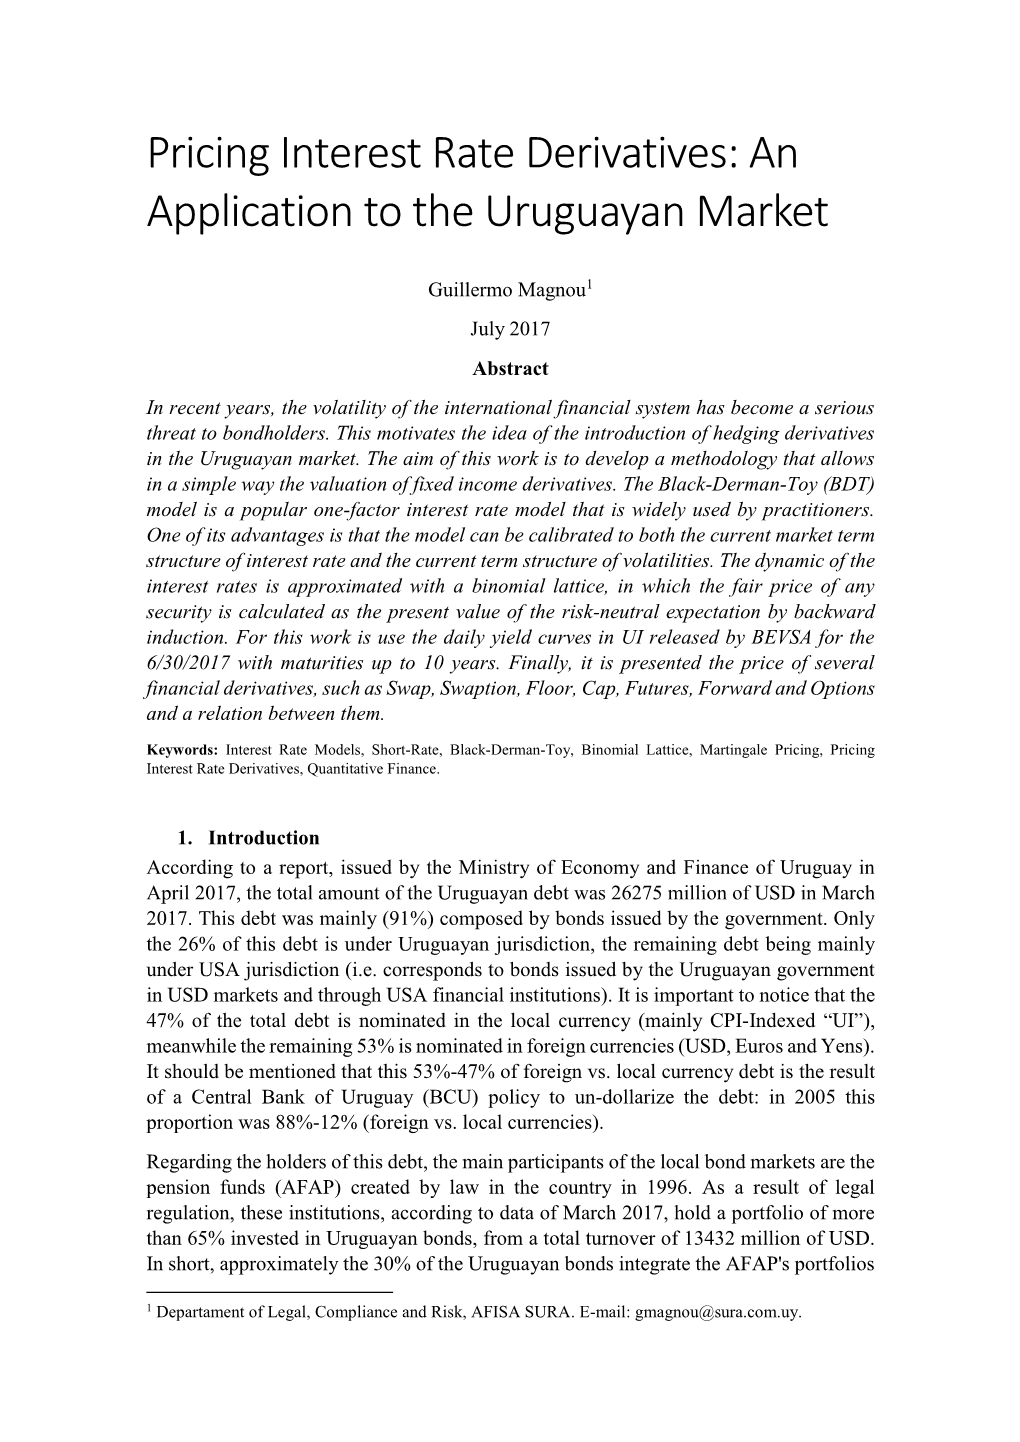 Pricing Interest Rate Derivatives: an Application to the Uruguayan Market